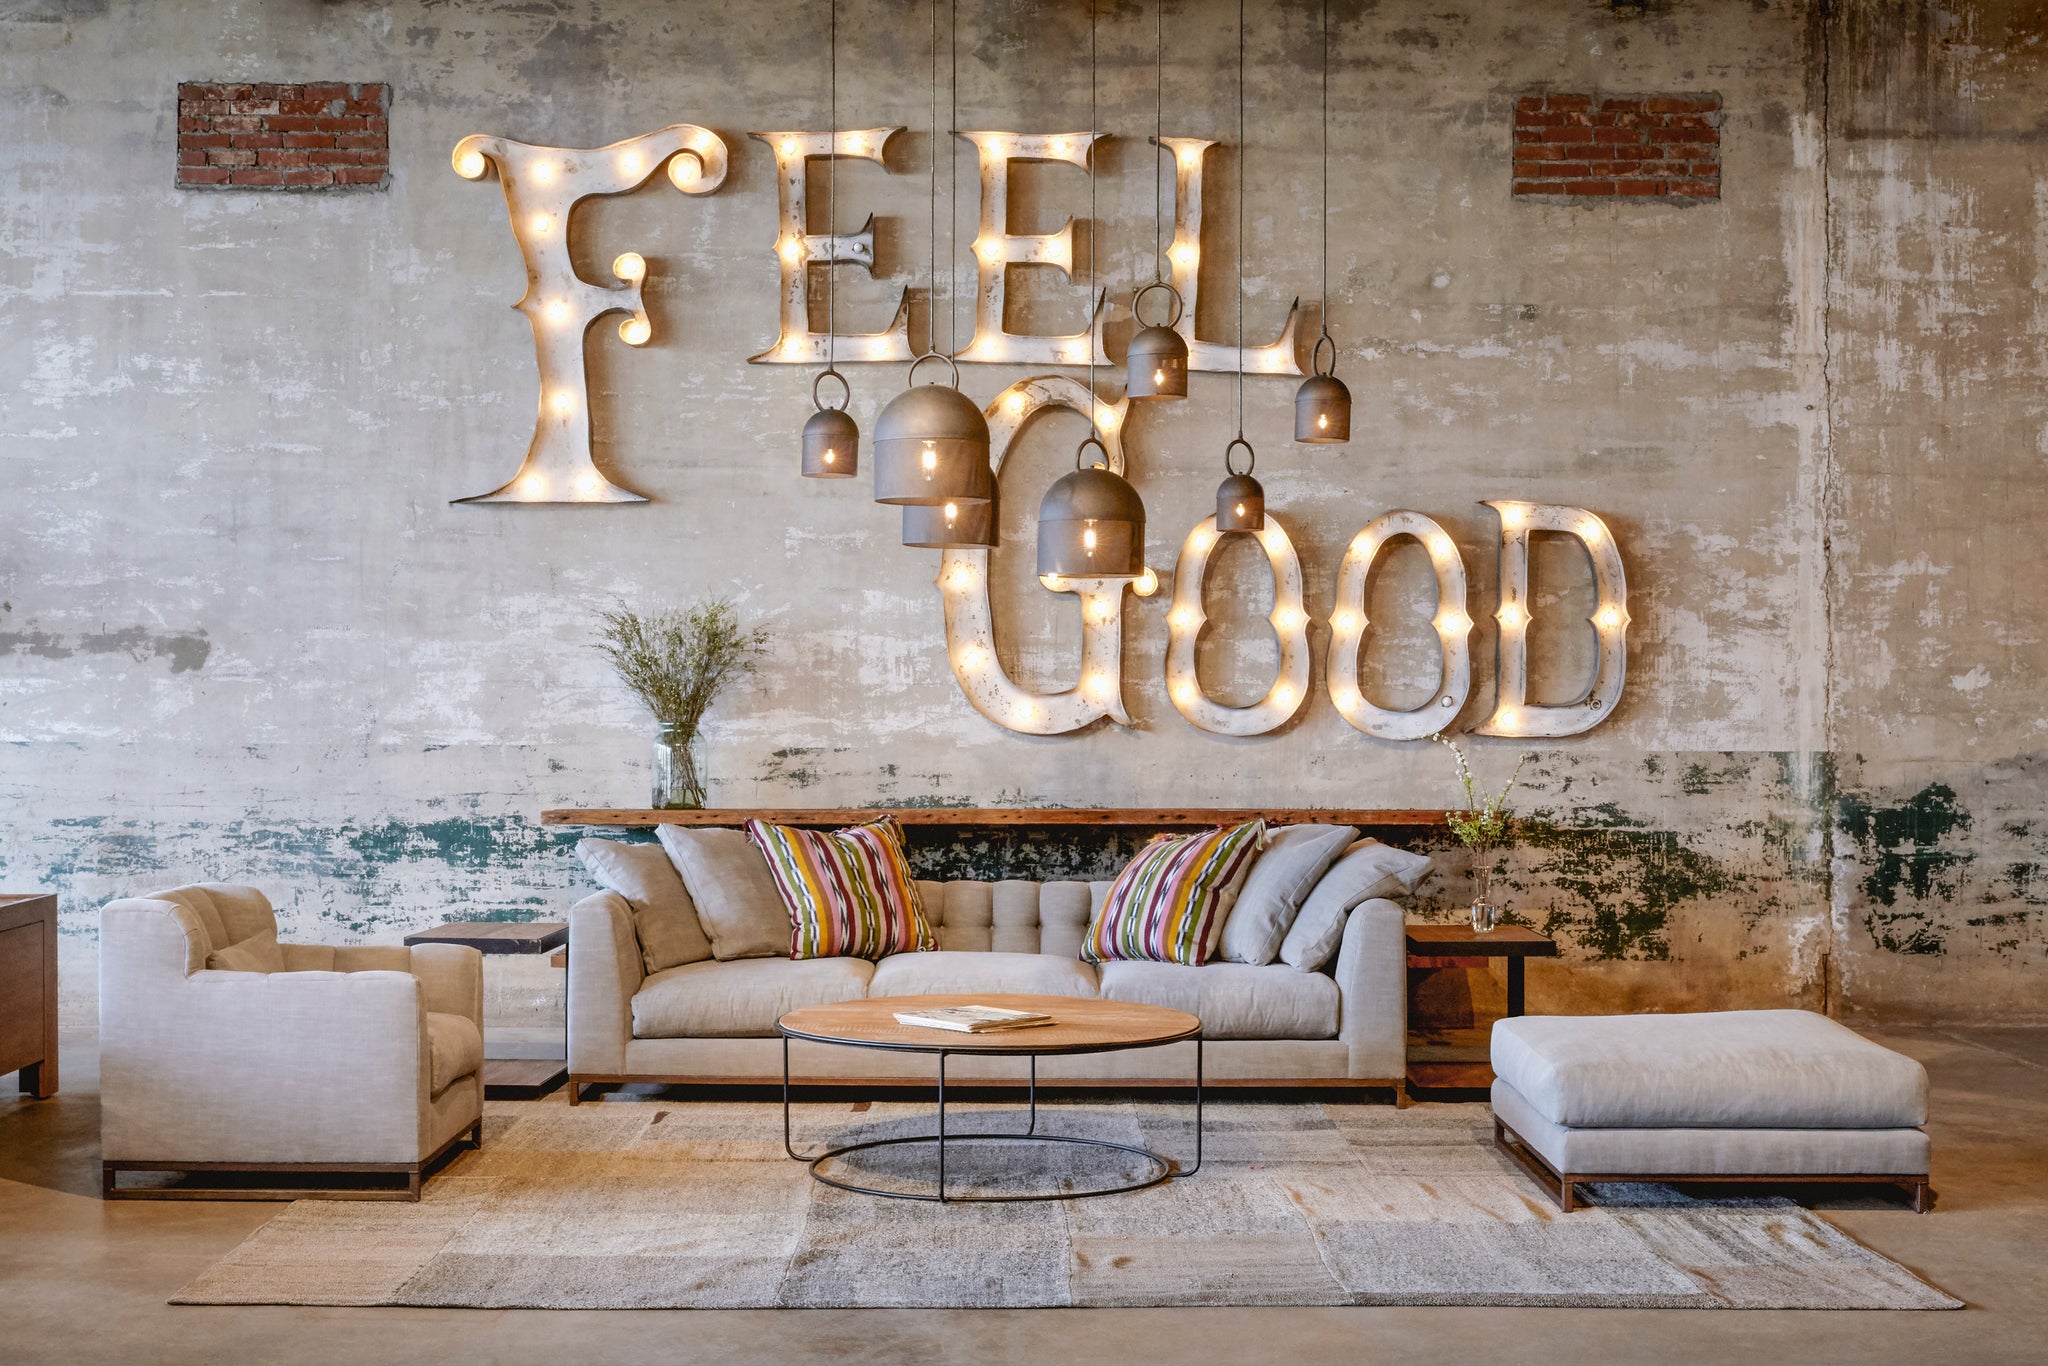  Upholstered sofa with matching chair and ottoman in light grey fabric. Round wood coffee table at the center with cluster of oxxo pendants hanging above. Back wall has a metal lit up sign reading "Feel Good".  